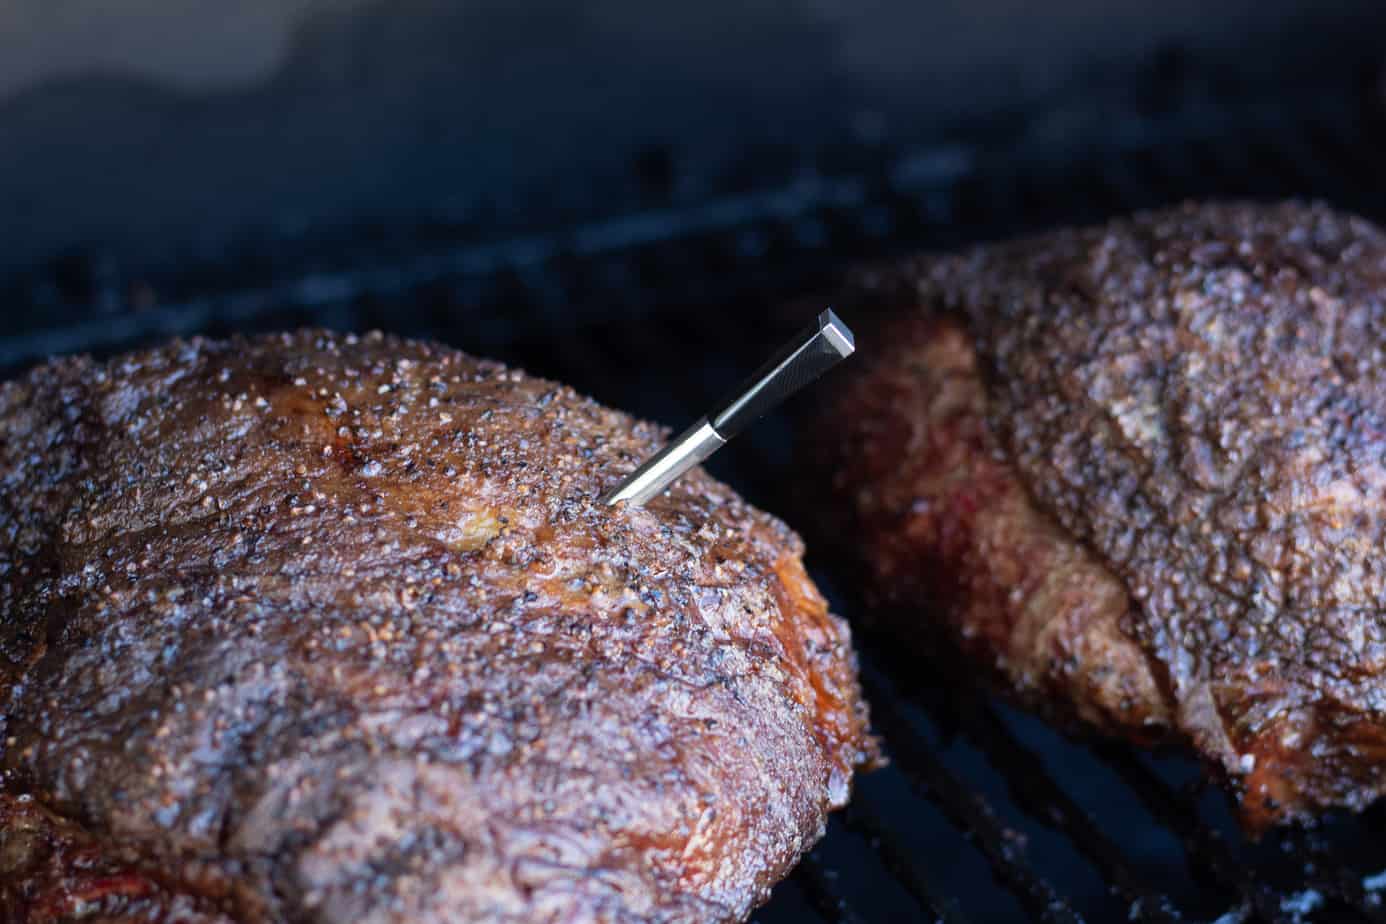 https://www.smokedmeatsunday.com/wp-content/uploads/2021/11/Yummly-Smart-Thermometer-In-Meat.jpg